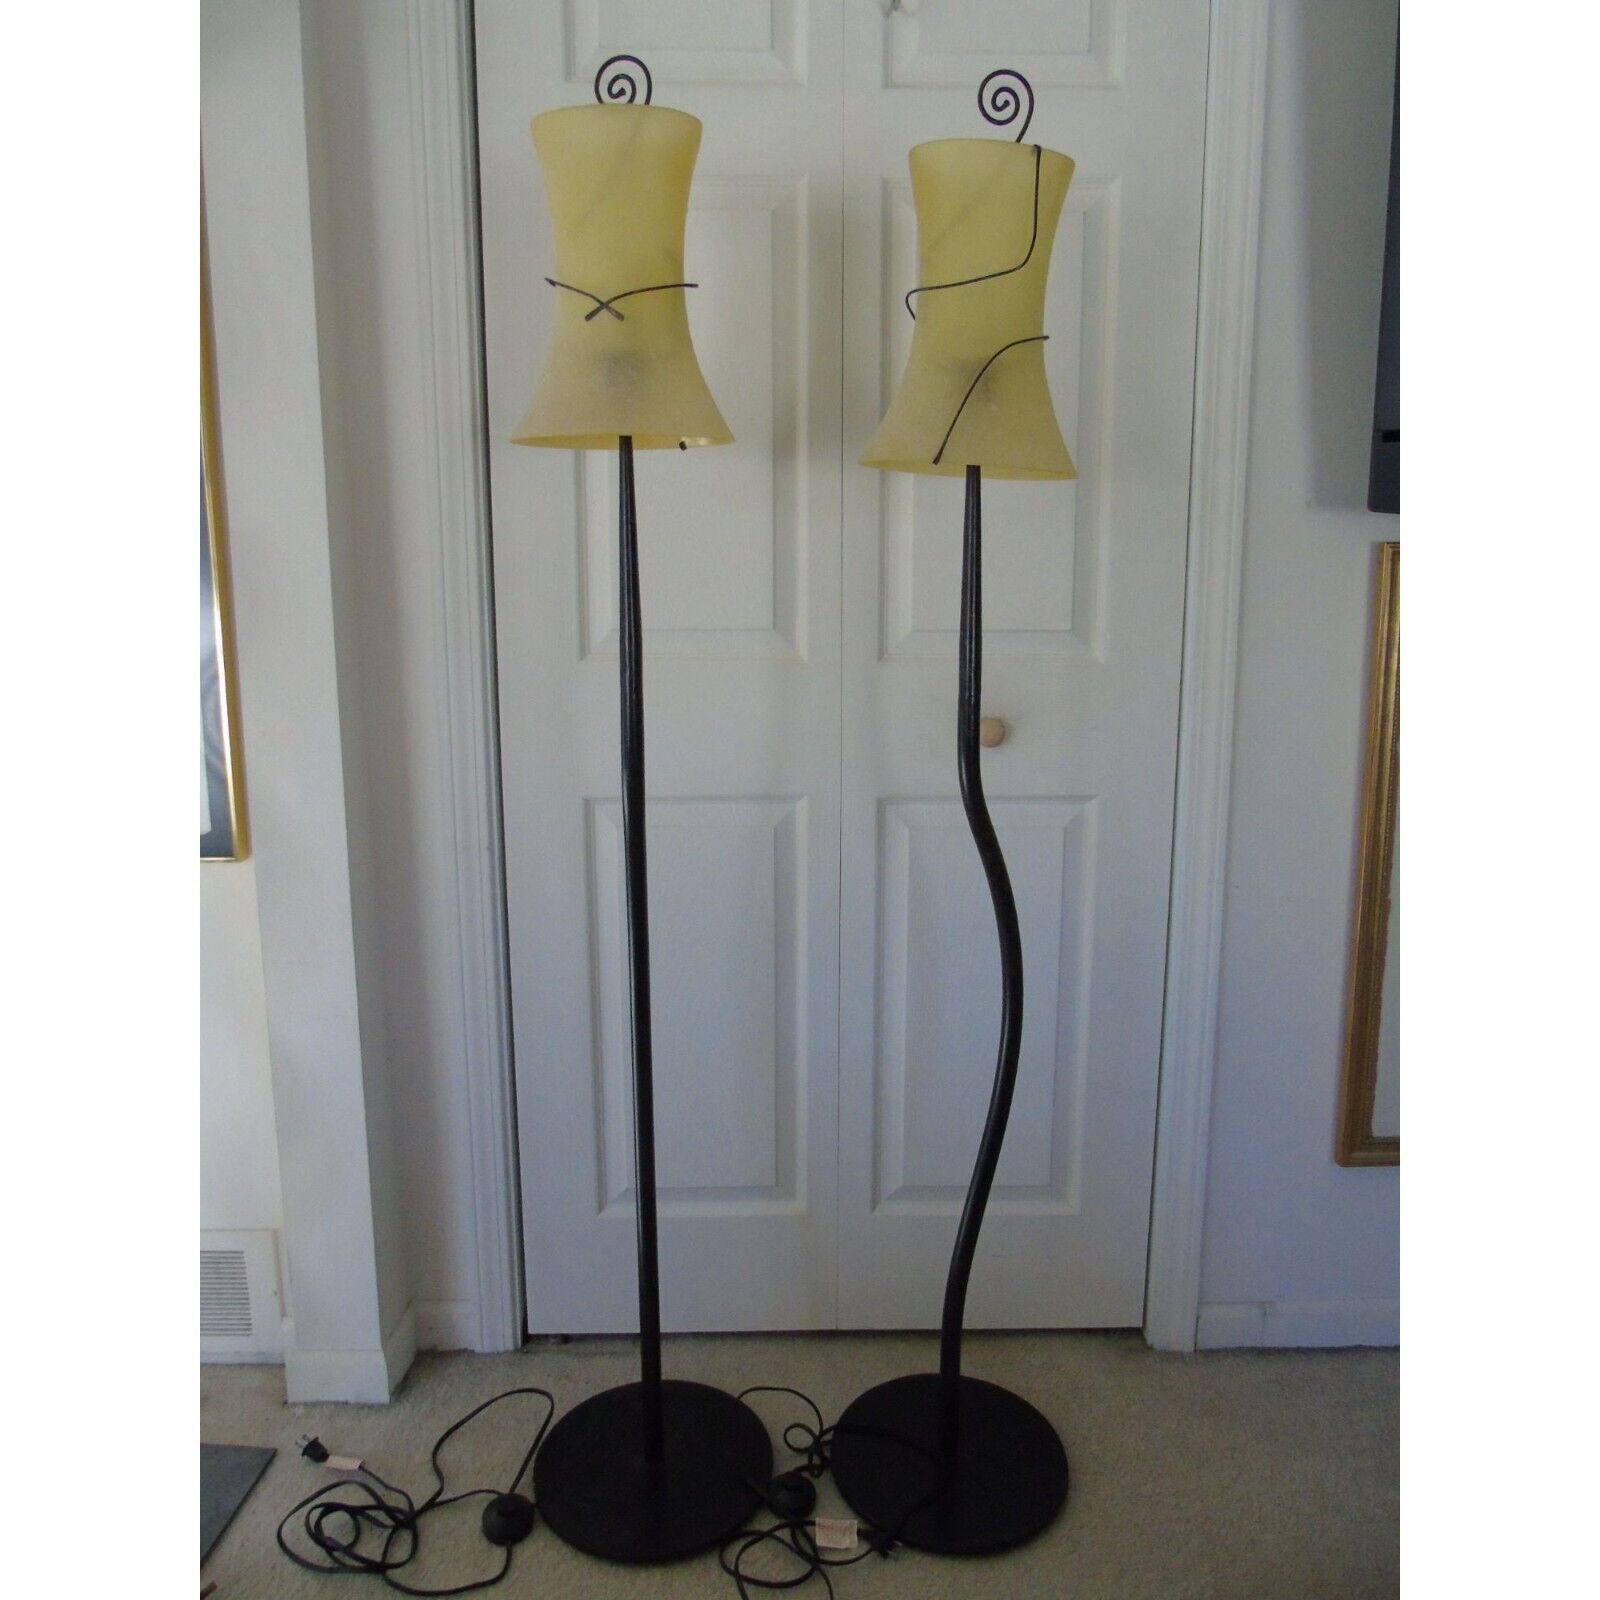 Pair Of Curved Portable Luminare Floor Lamps Frosted Yellow Glass Shades